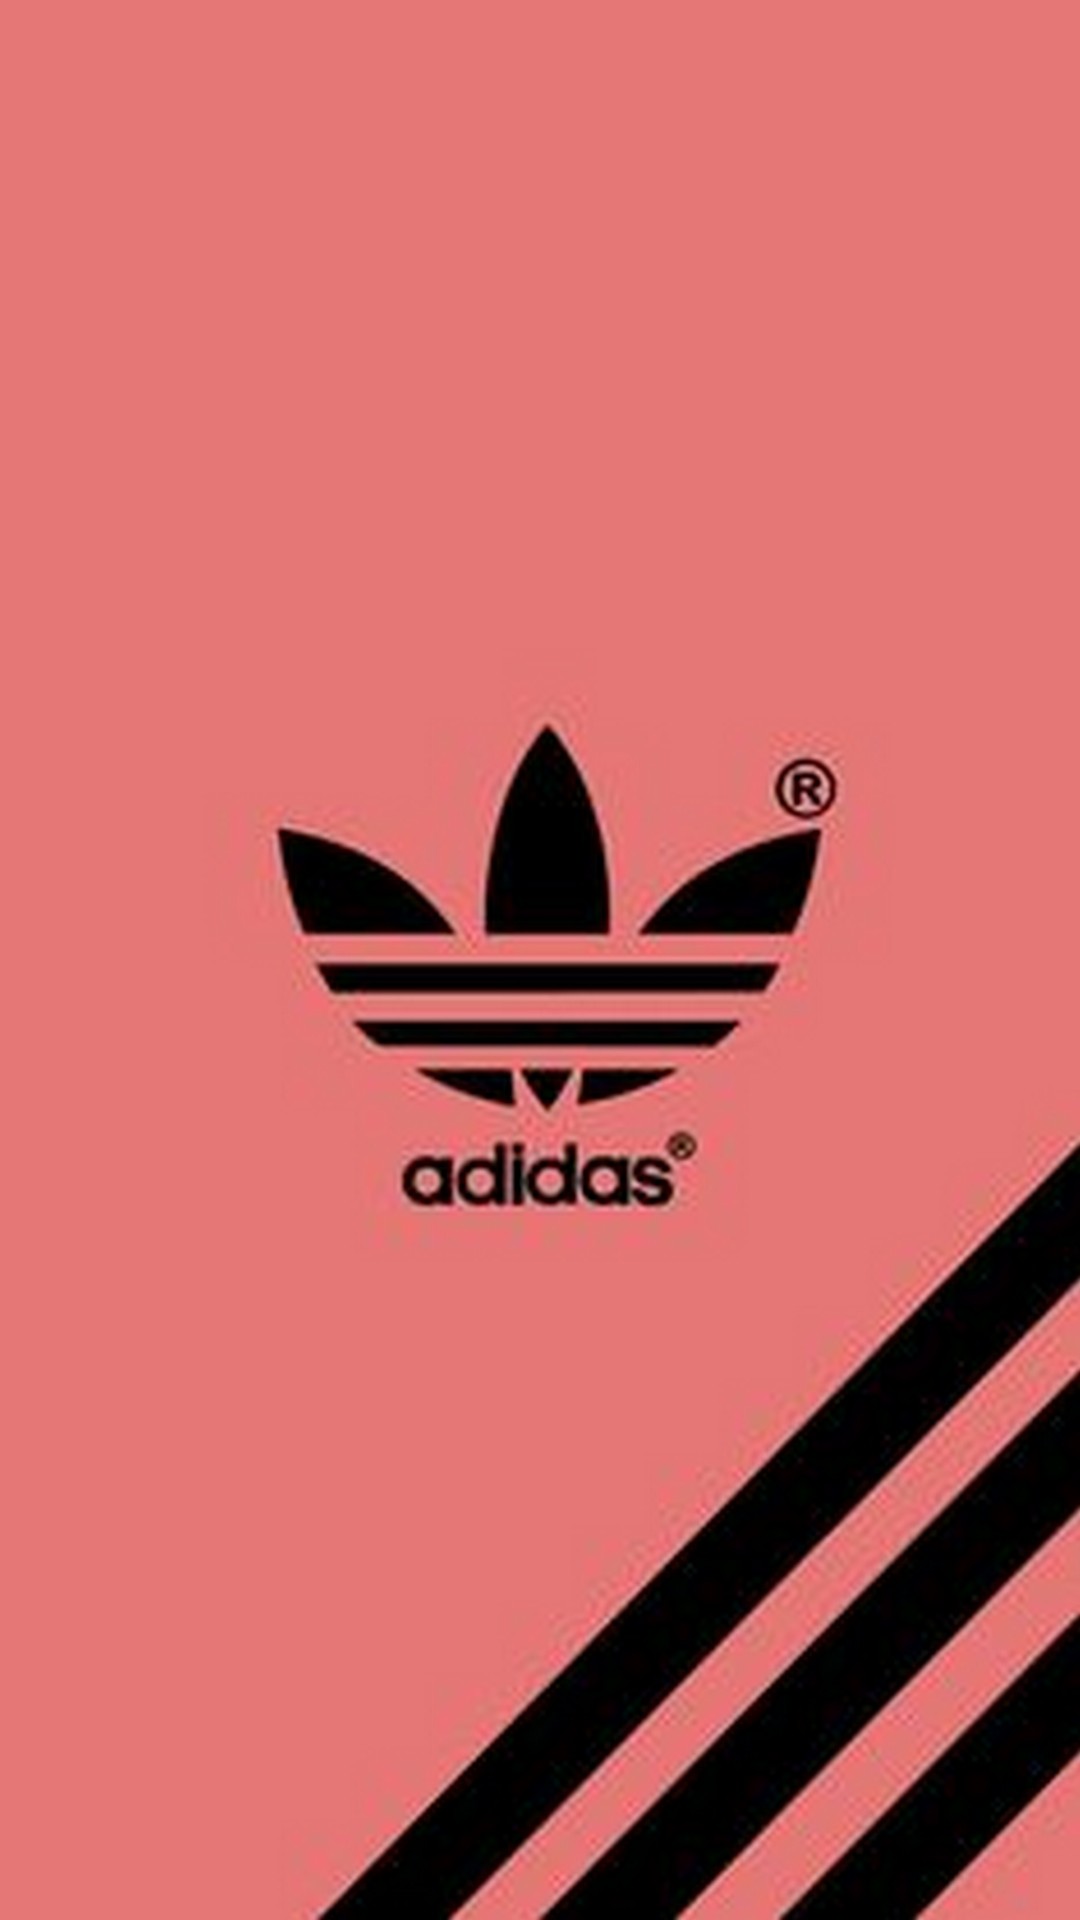 Adidas Iphone Wallpaper Hd With High-resolution Pixel - Adidas Wallpaper Iphone X - HD Wallpaper 